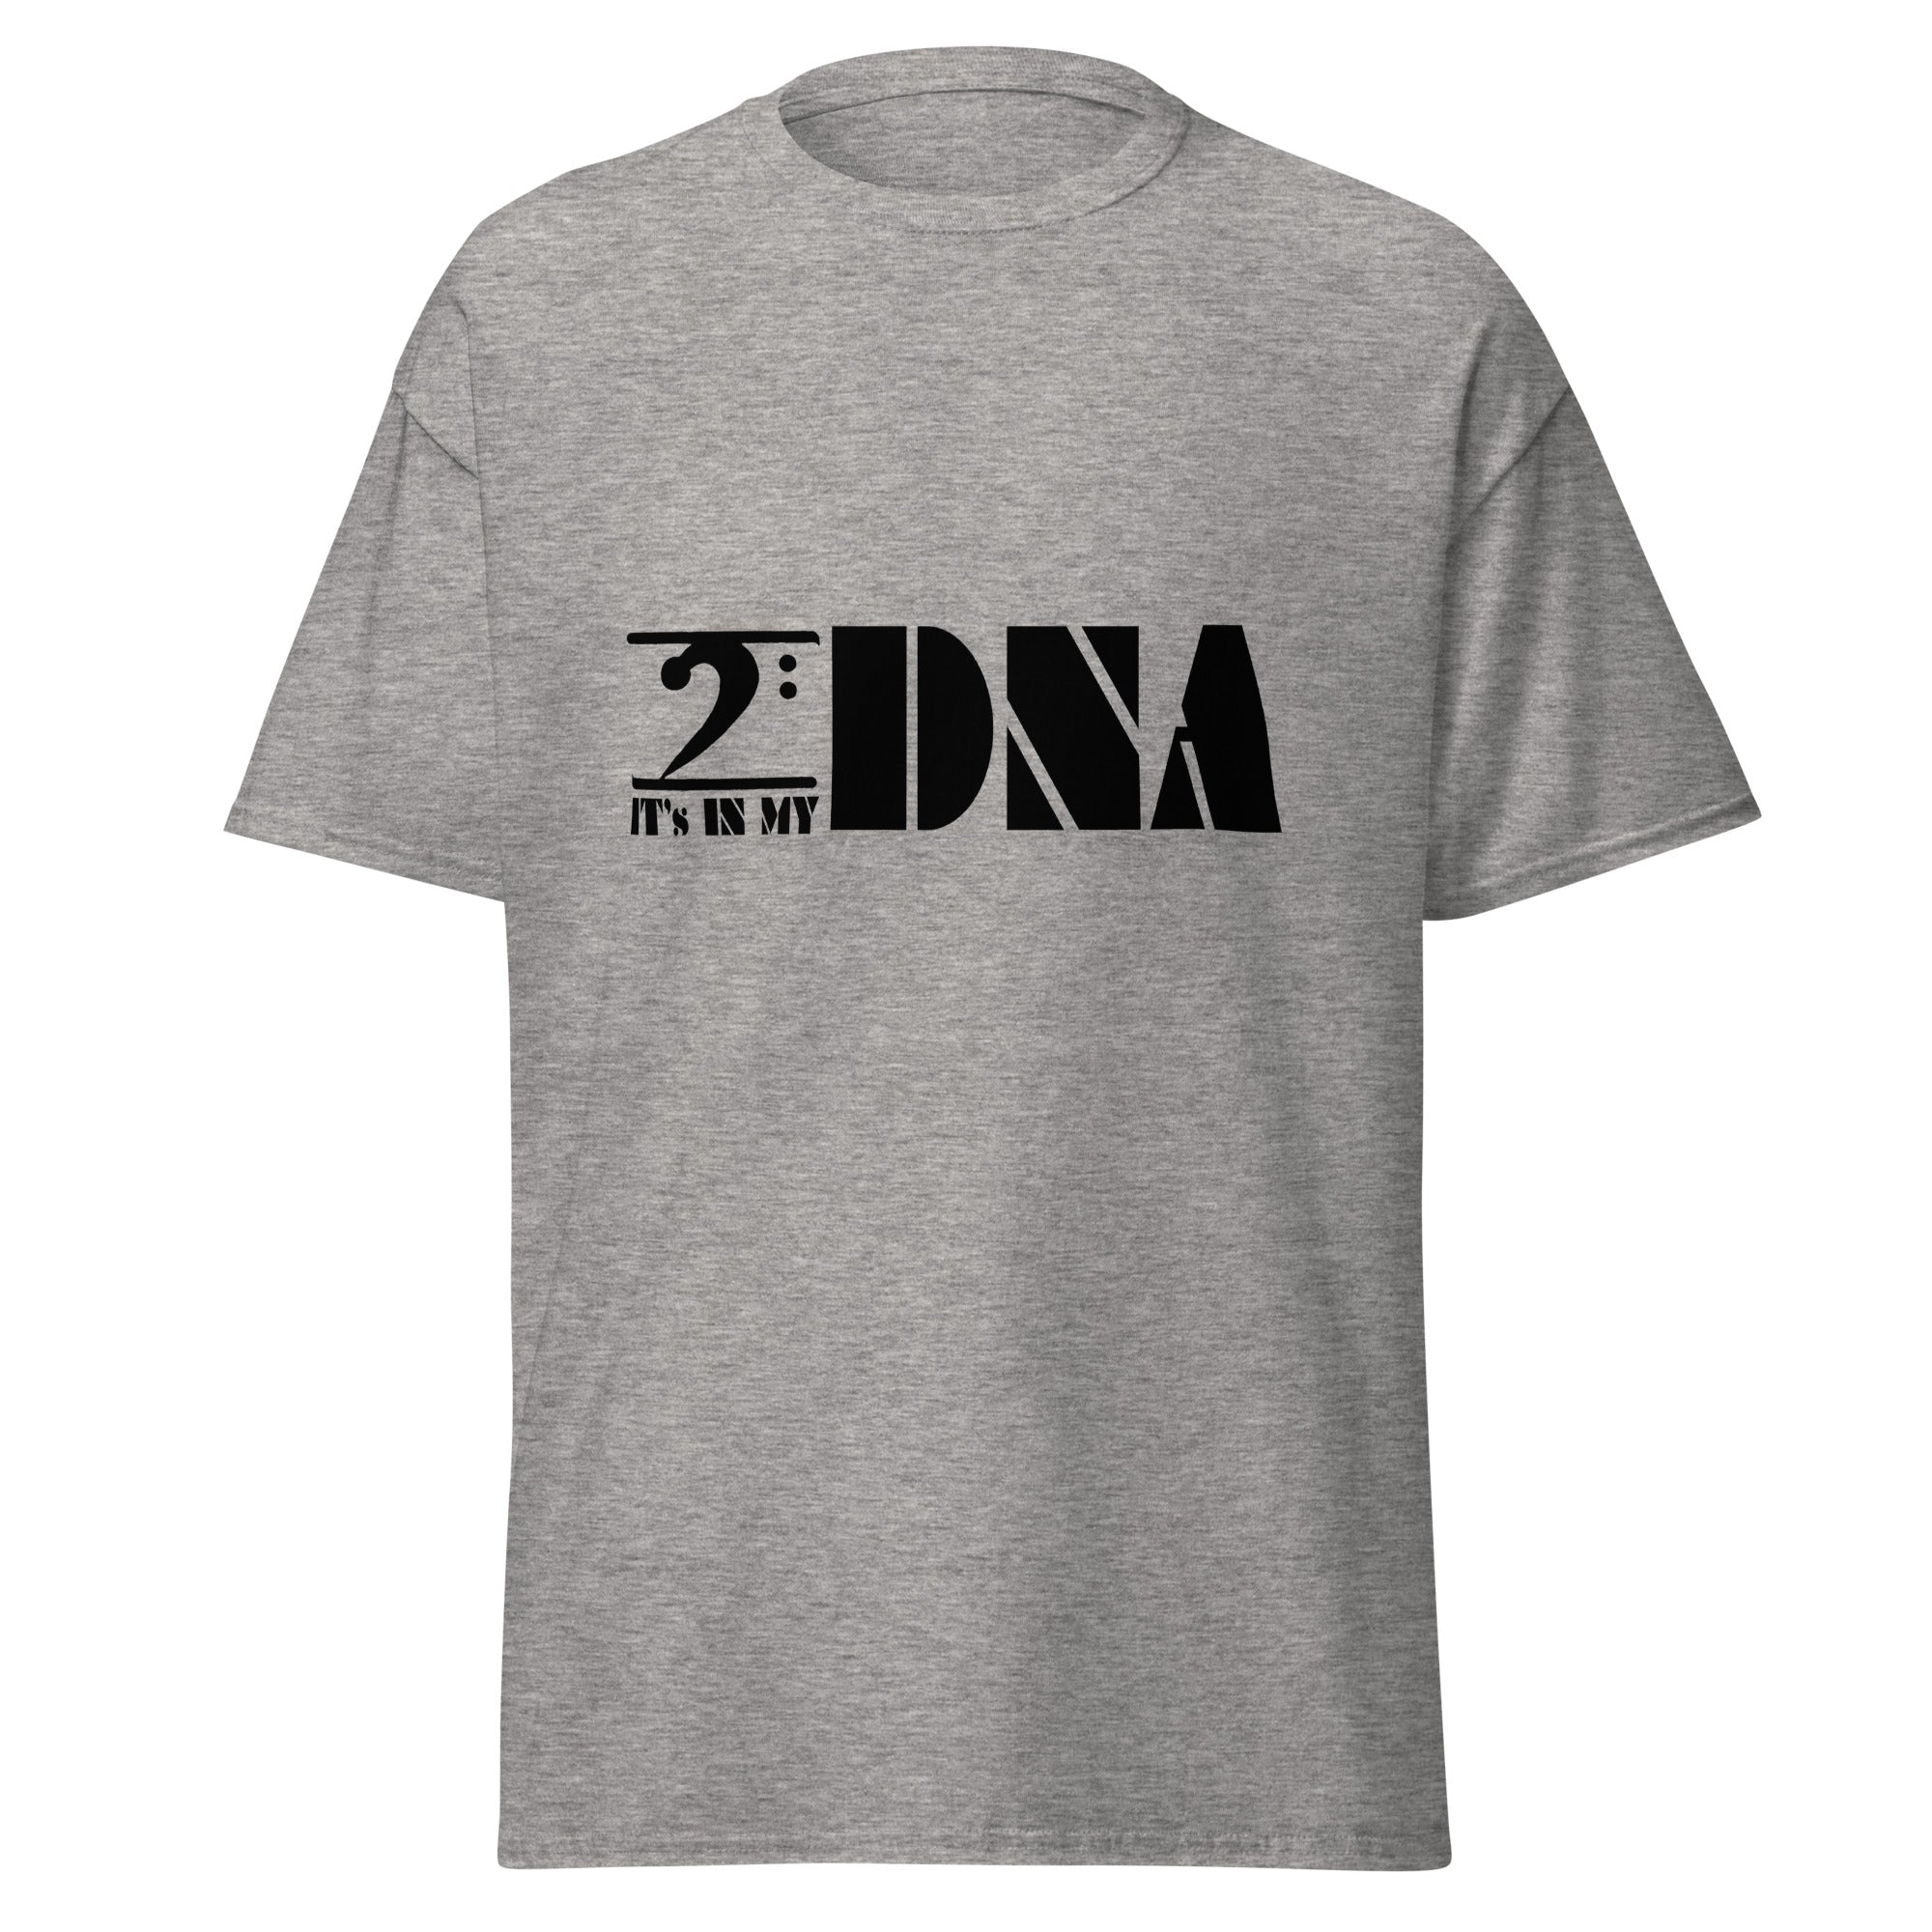 IT'S IN MY DNA Short-Sleeve T-Shirt